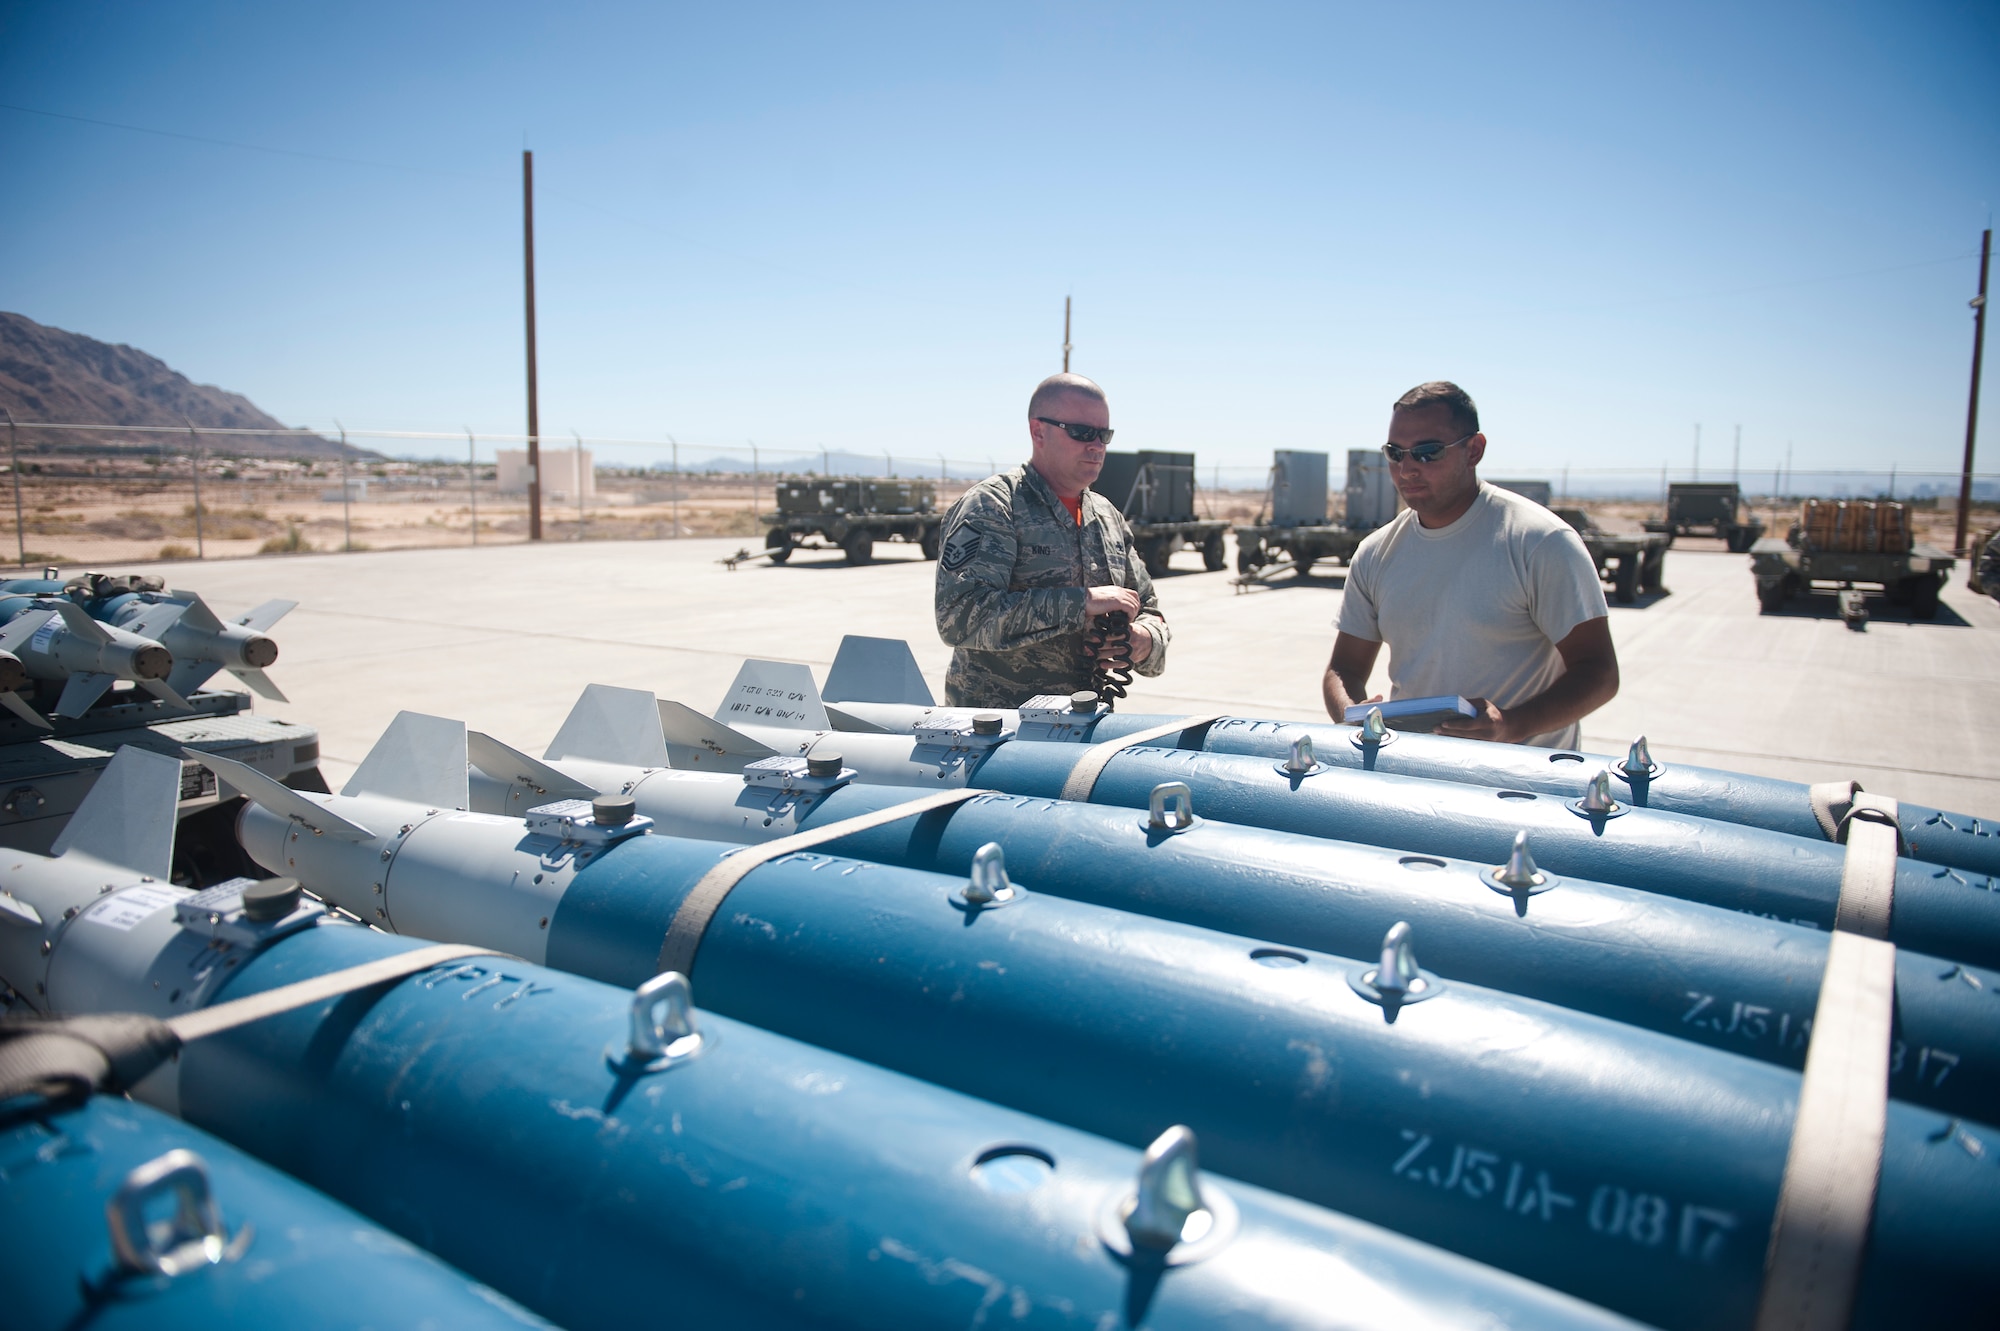 Master Sgt. Donald King, 57th Maintenance Squadron munitions line delivery NCO in charge, and Senior Airman Miguel Vega, 57th MXS munitions line delivery crew chief, inspect munitions after dropping them off on a munitions holding pad at Nellis Air Force Base, Nev., Sept. 19, 2014. Nellis accounts for approximately 40 percent of Air Combat Command’s total munitions expenditures. (U.S. Air Force photo by Staff Sgt. Siuta B. Ika)